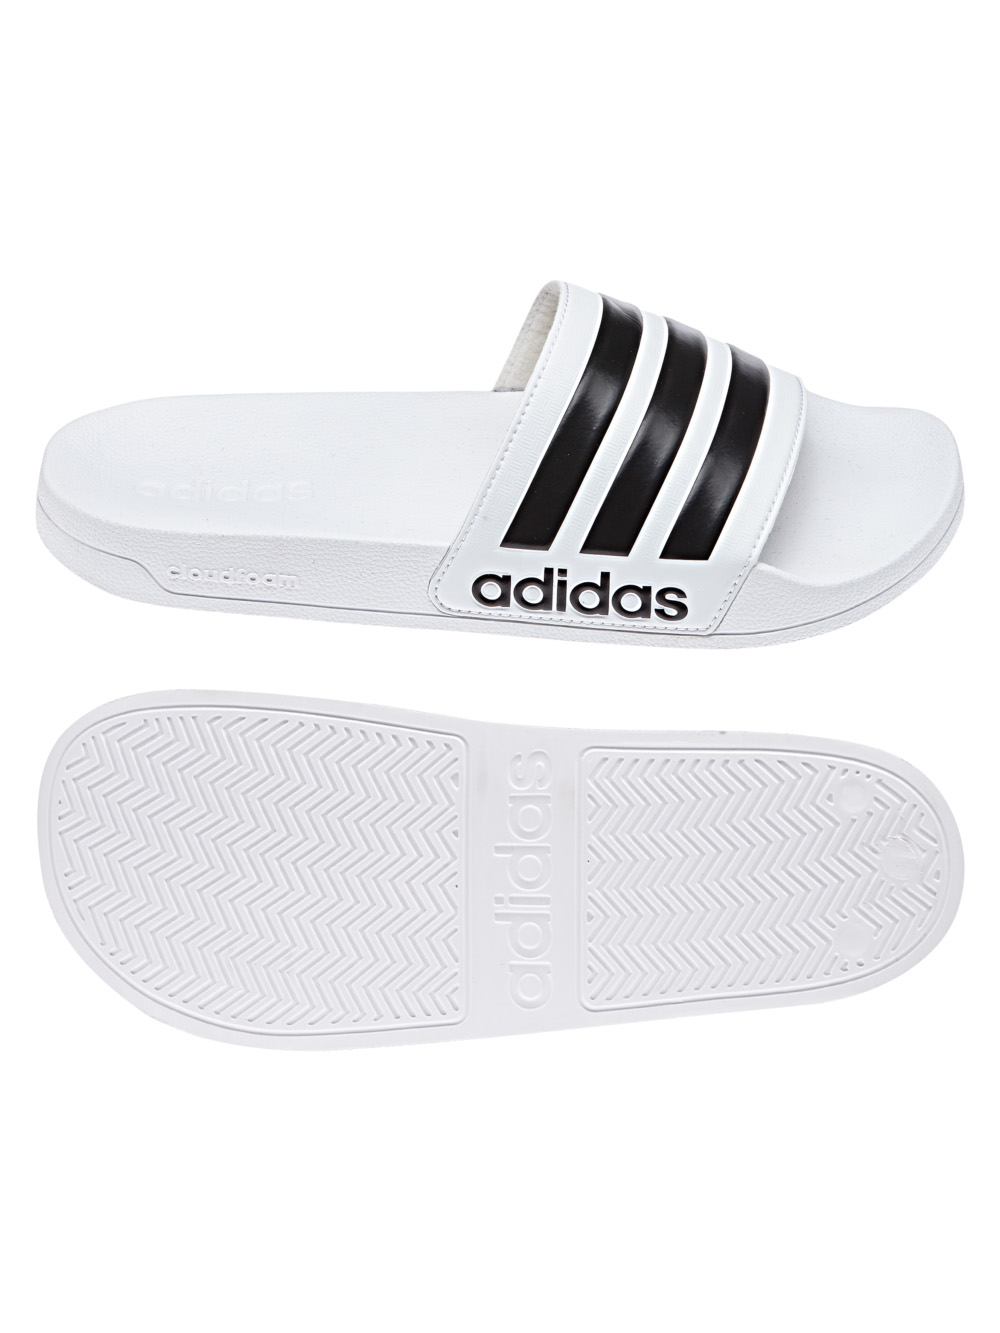 Adidas Adilette Sandals - White Midwest Volleyball